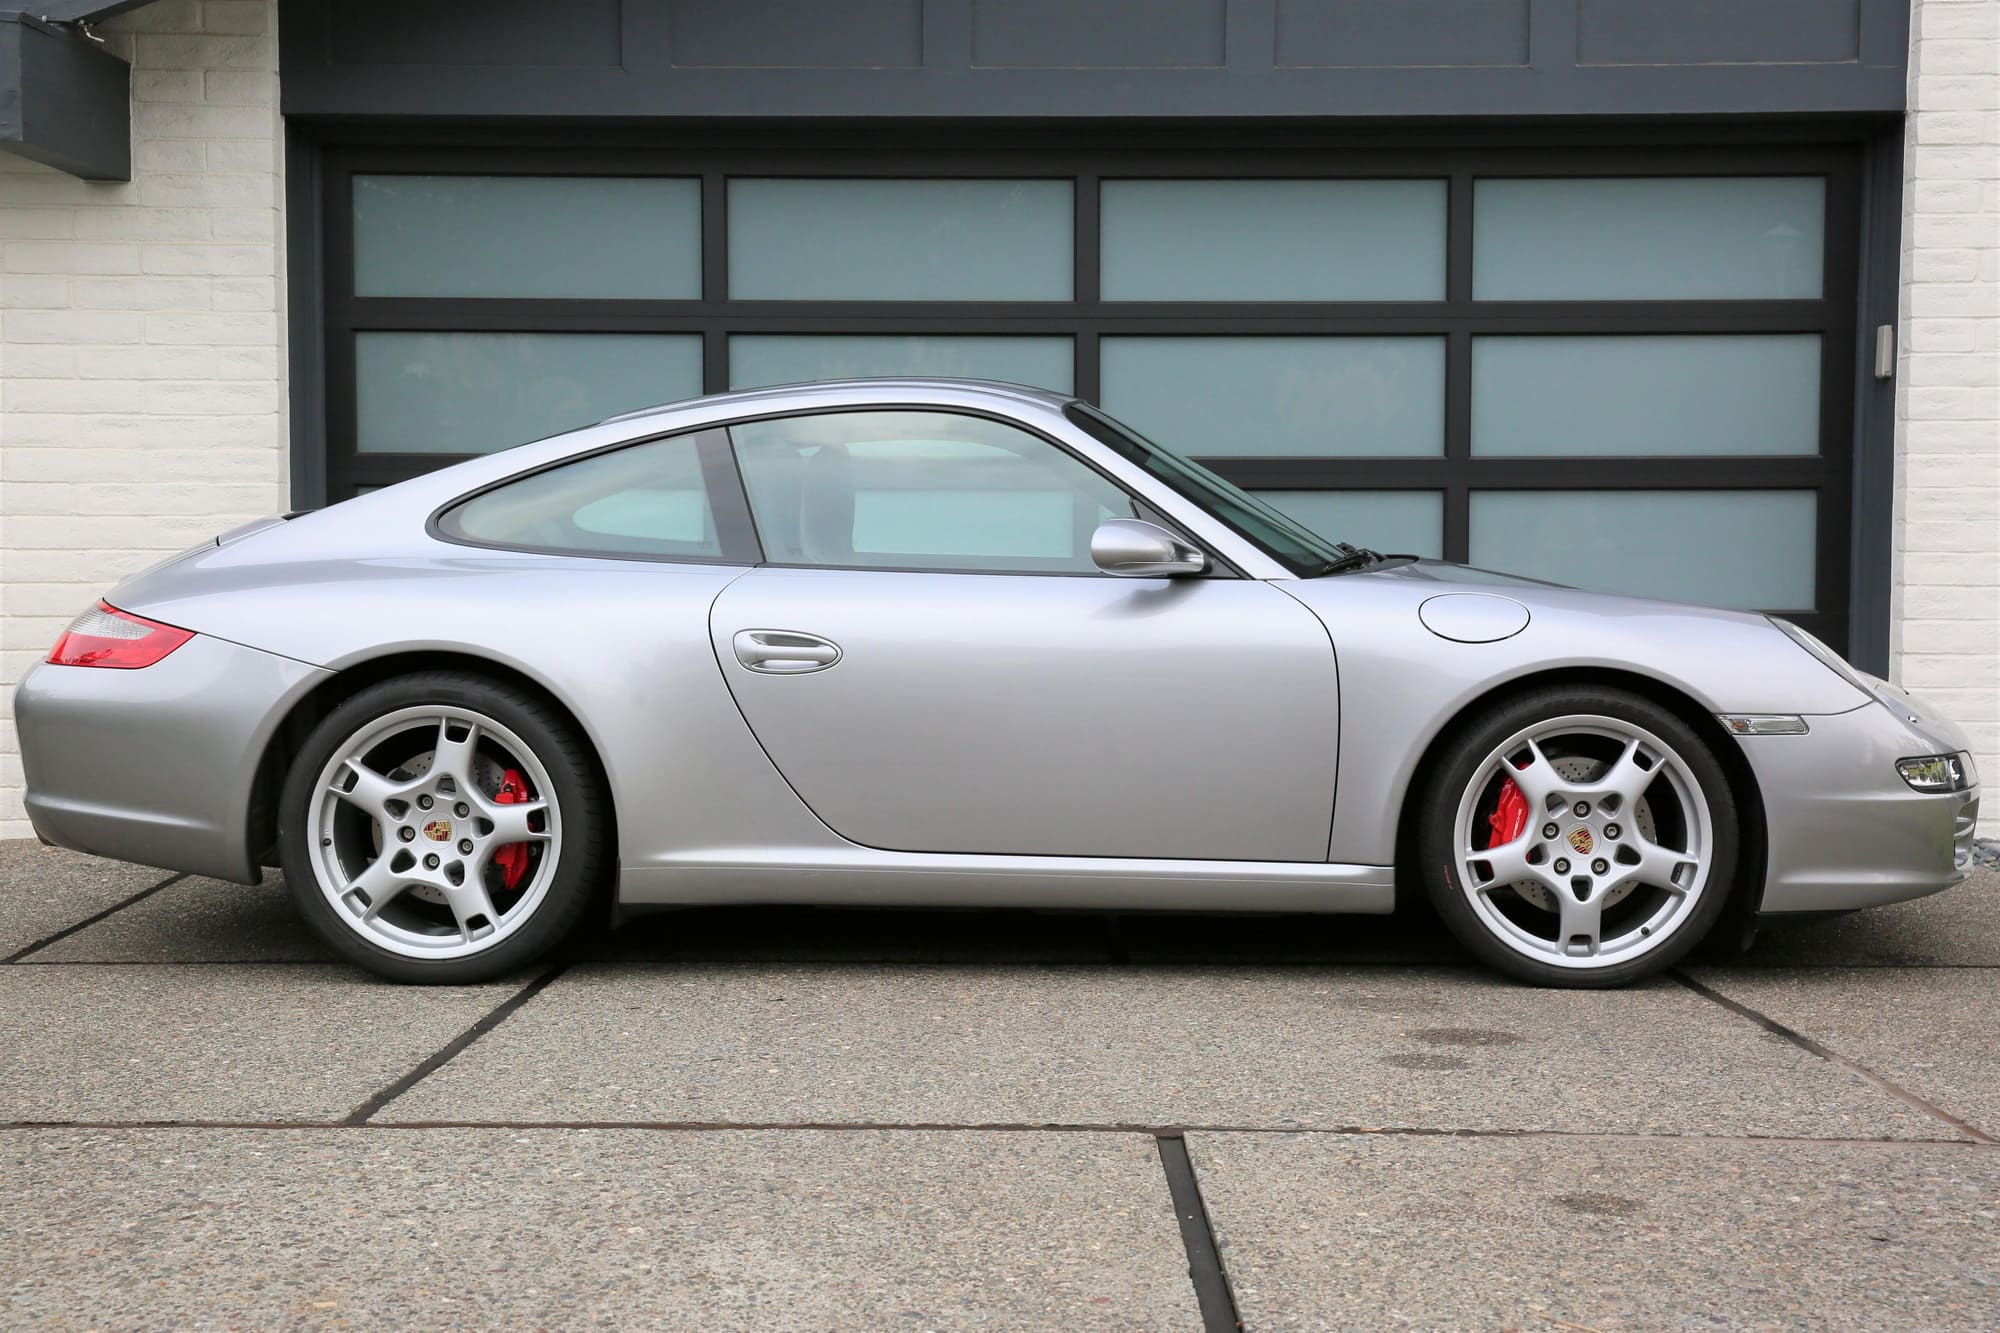 2006 Porsche 911 - 2006 997S - GT Silver, original owner - Used - VIN WP0AB29916s740228 - 23,450 Miles - 6 cyl - 2WD - Manual - Coupe - Silver - Napa, CA 94558, United States